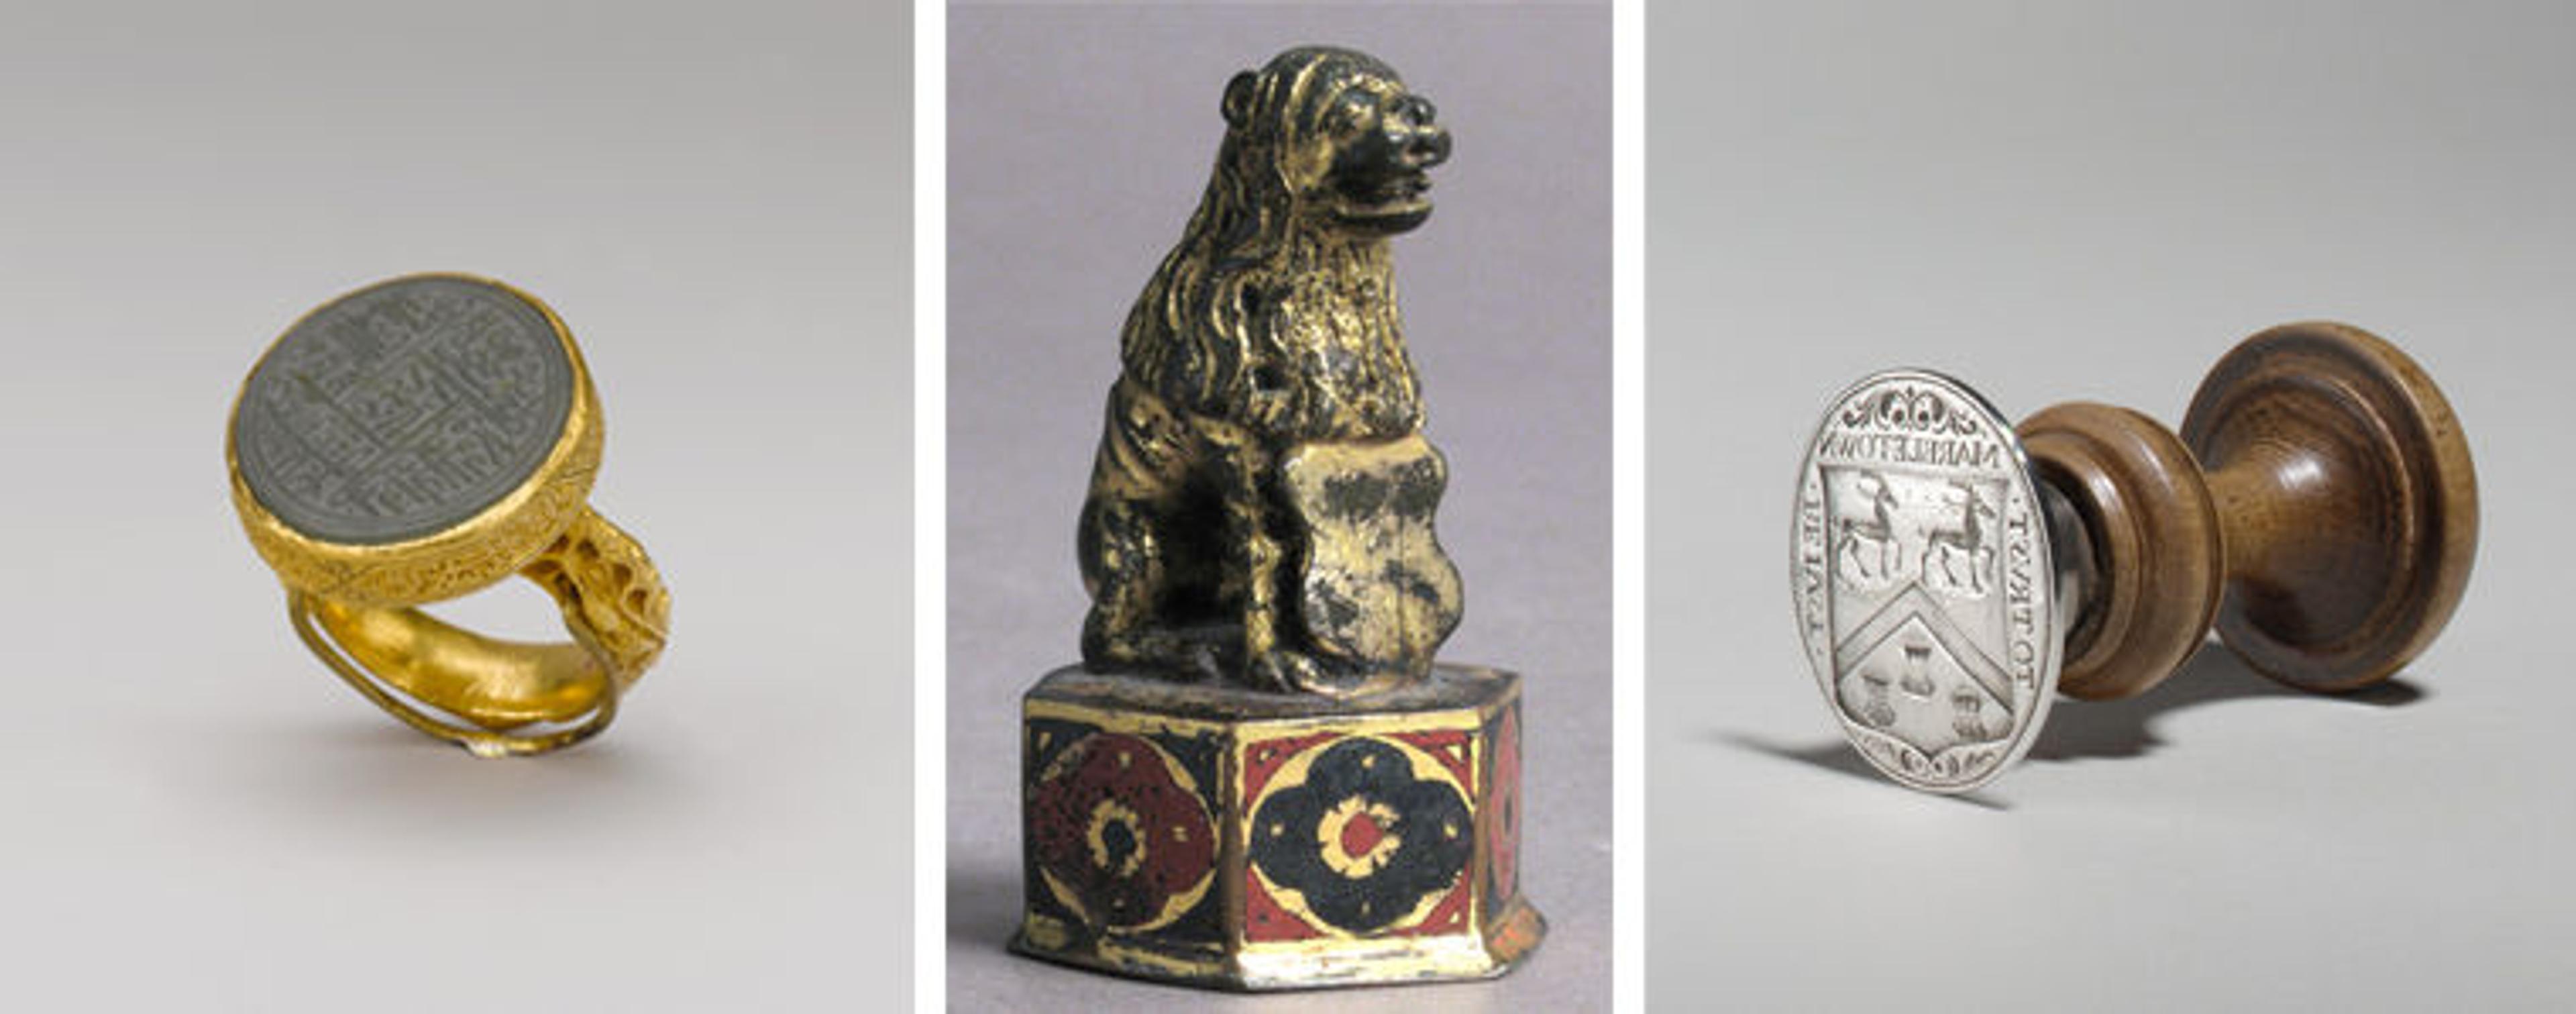 Three seals are shown. The one on the left is on top of a gold ring. The top of the one in the middle is decorated with a small sculpture of an animal, possibly a dog. And the top of the one on the right is made from wood.